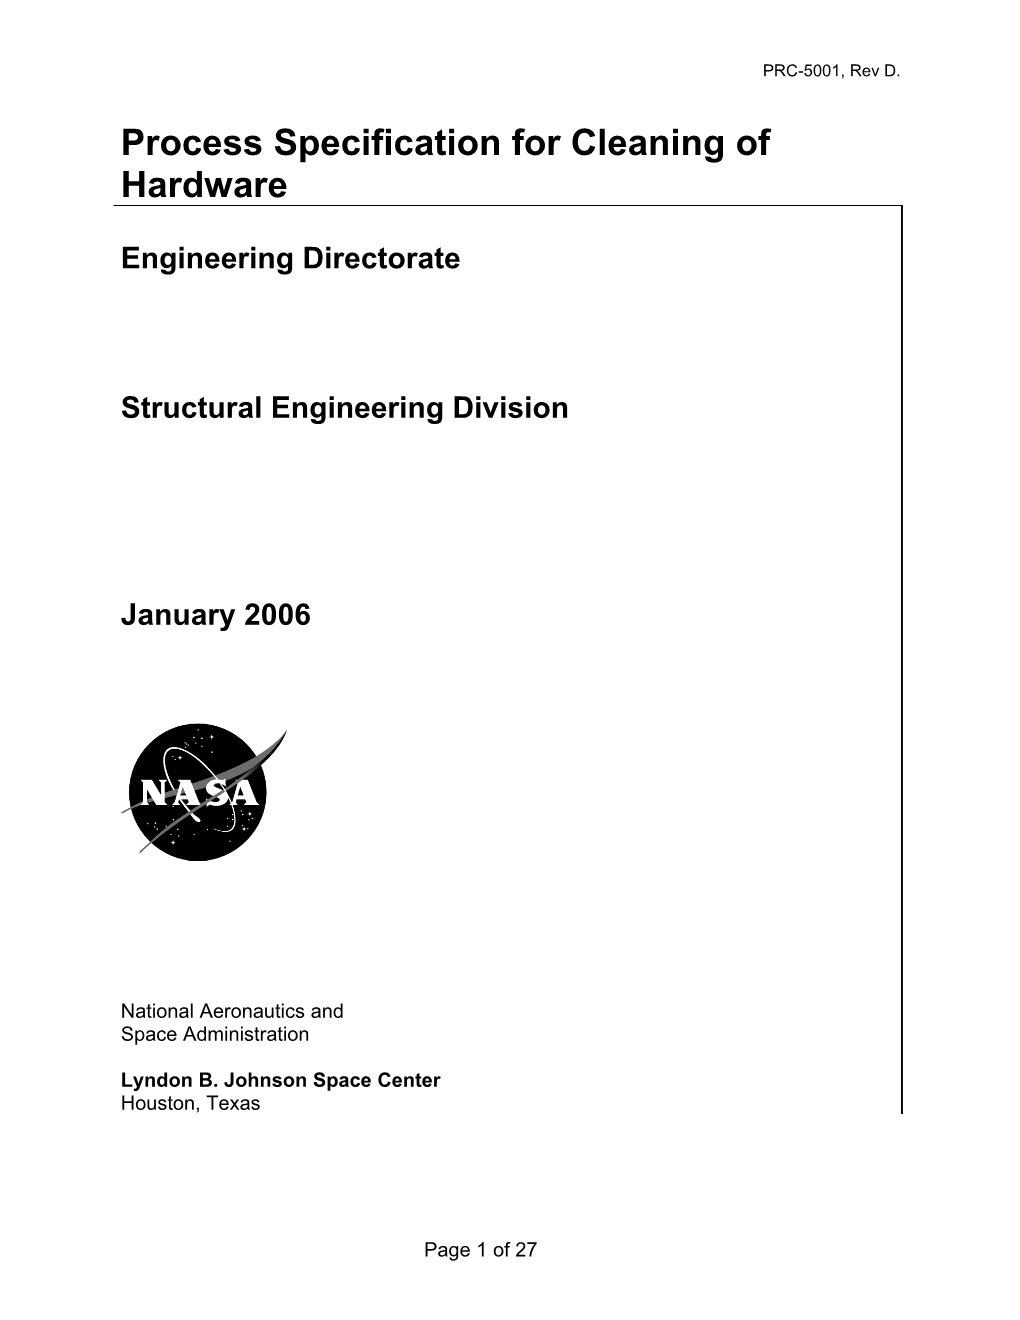 Process Specification for Cleaning of Hardware